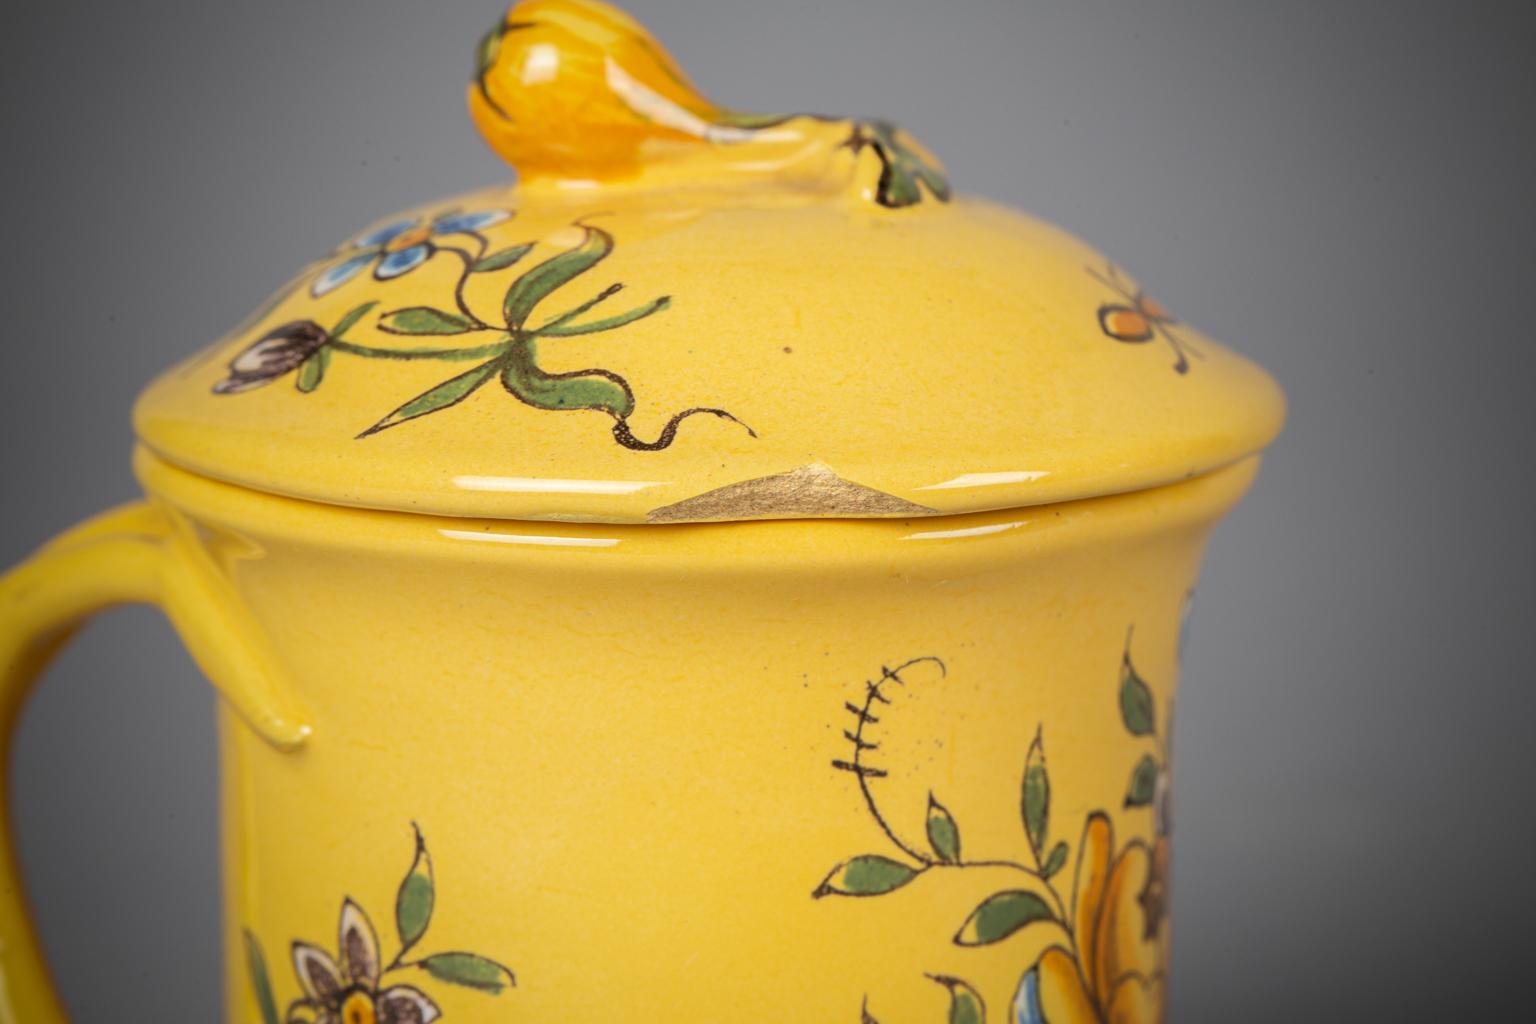 French Faience Yellow Ground Pot-de-creme Set with Platter, circa 1890 For Sale 2